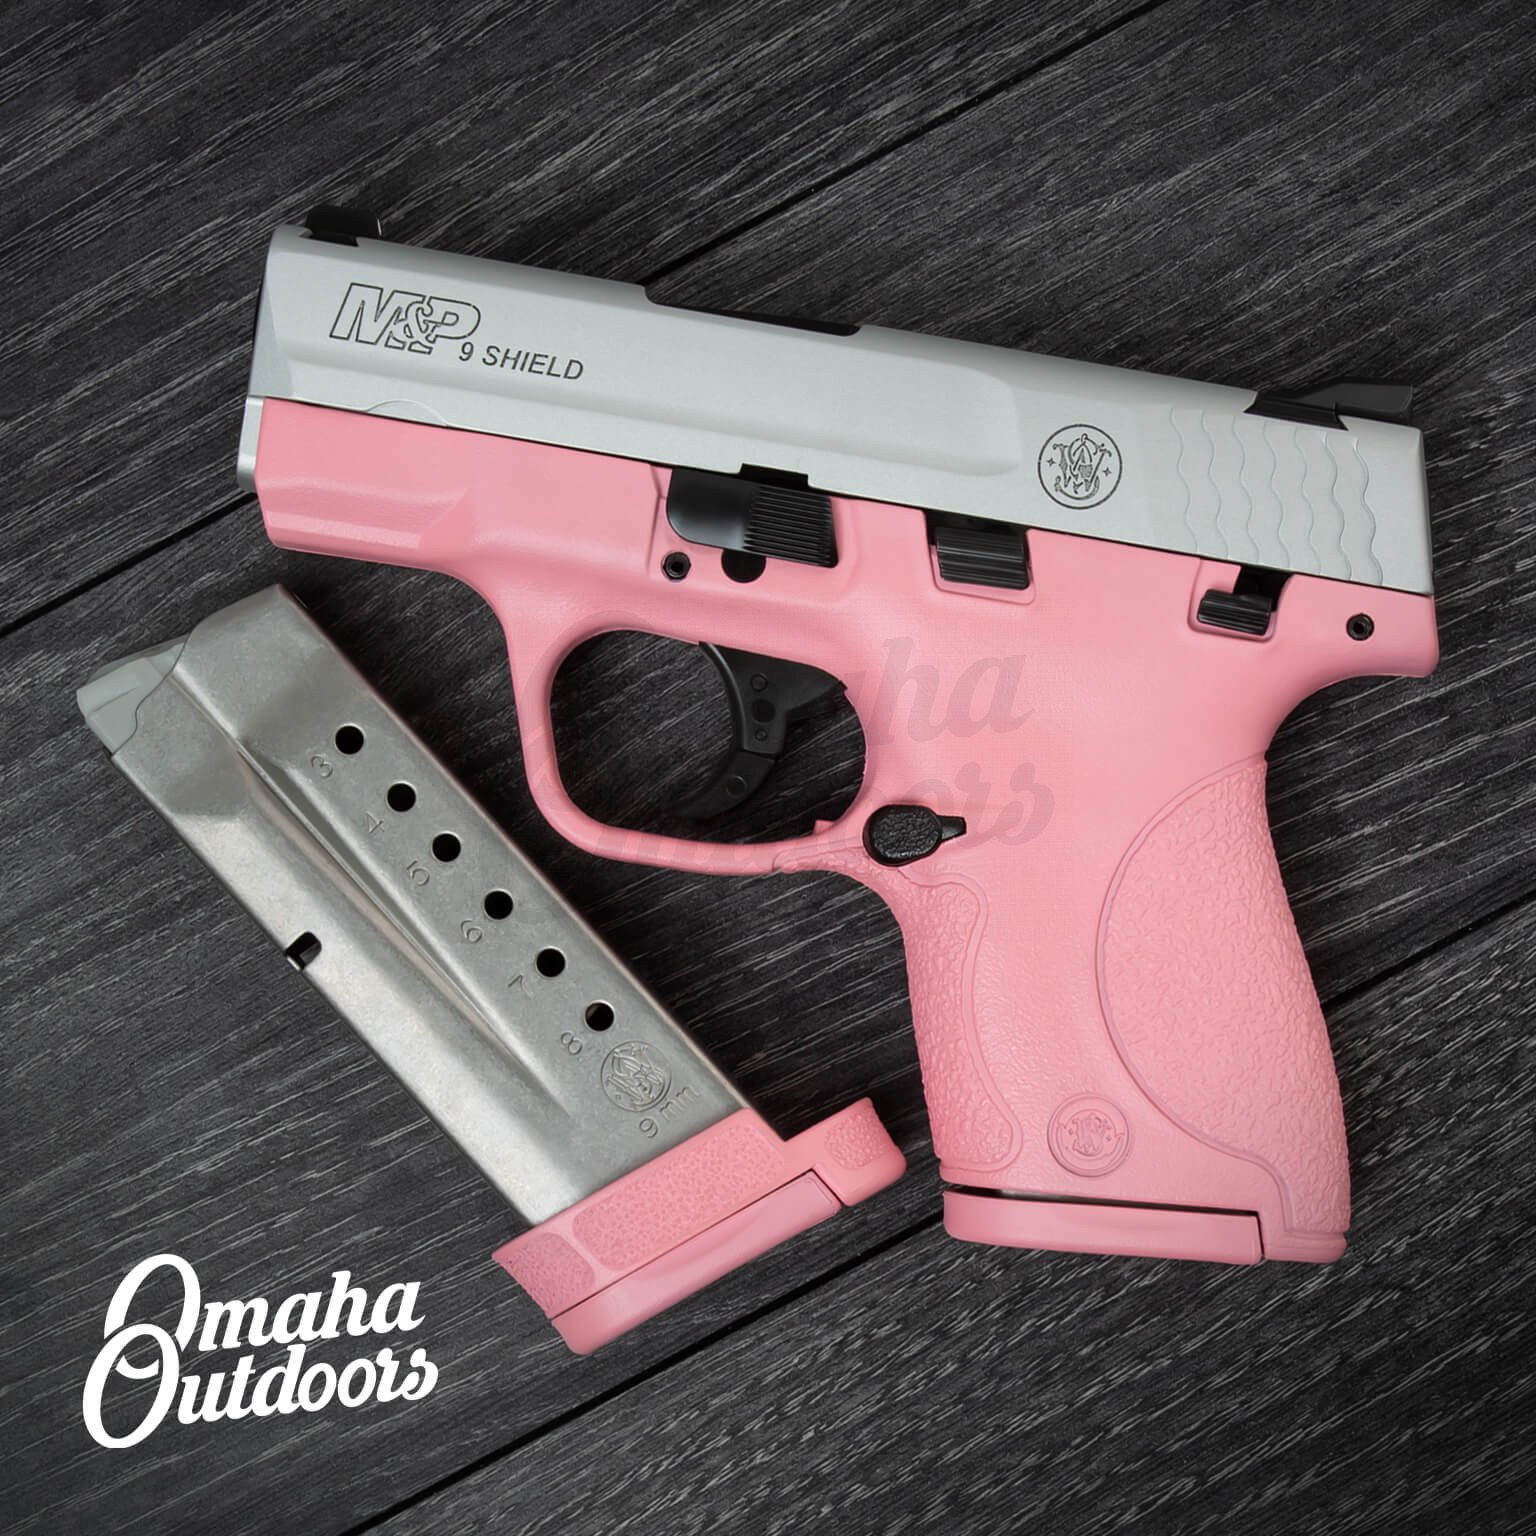 Smith And Wesson M P 9 Shield 7 8 Rd 9mm Victoria Pink Satin Aluminum Pistol Thumb Safety Omaha Outdoors